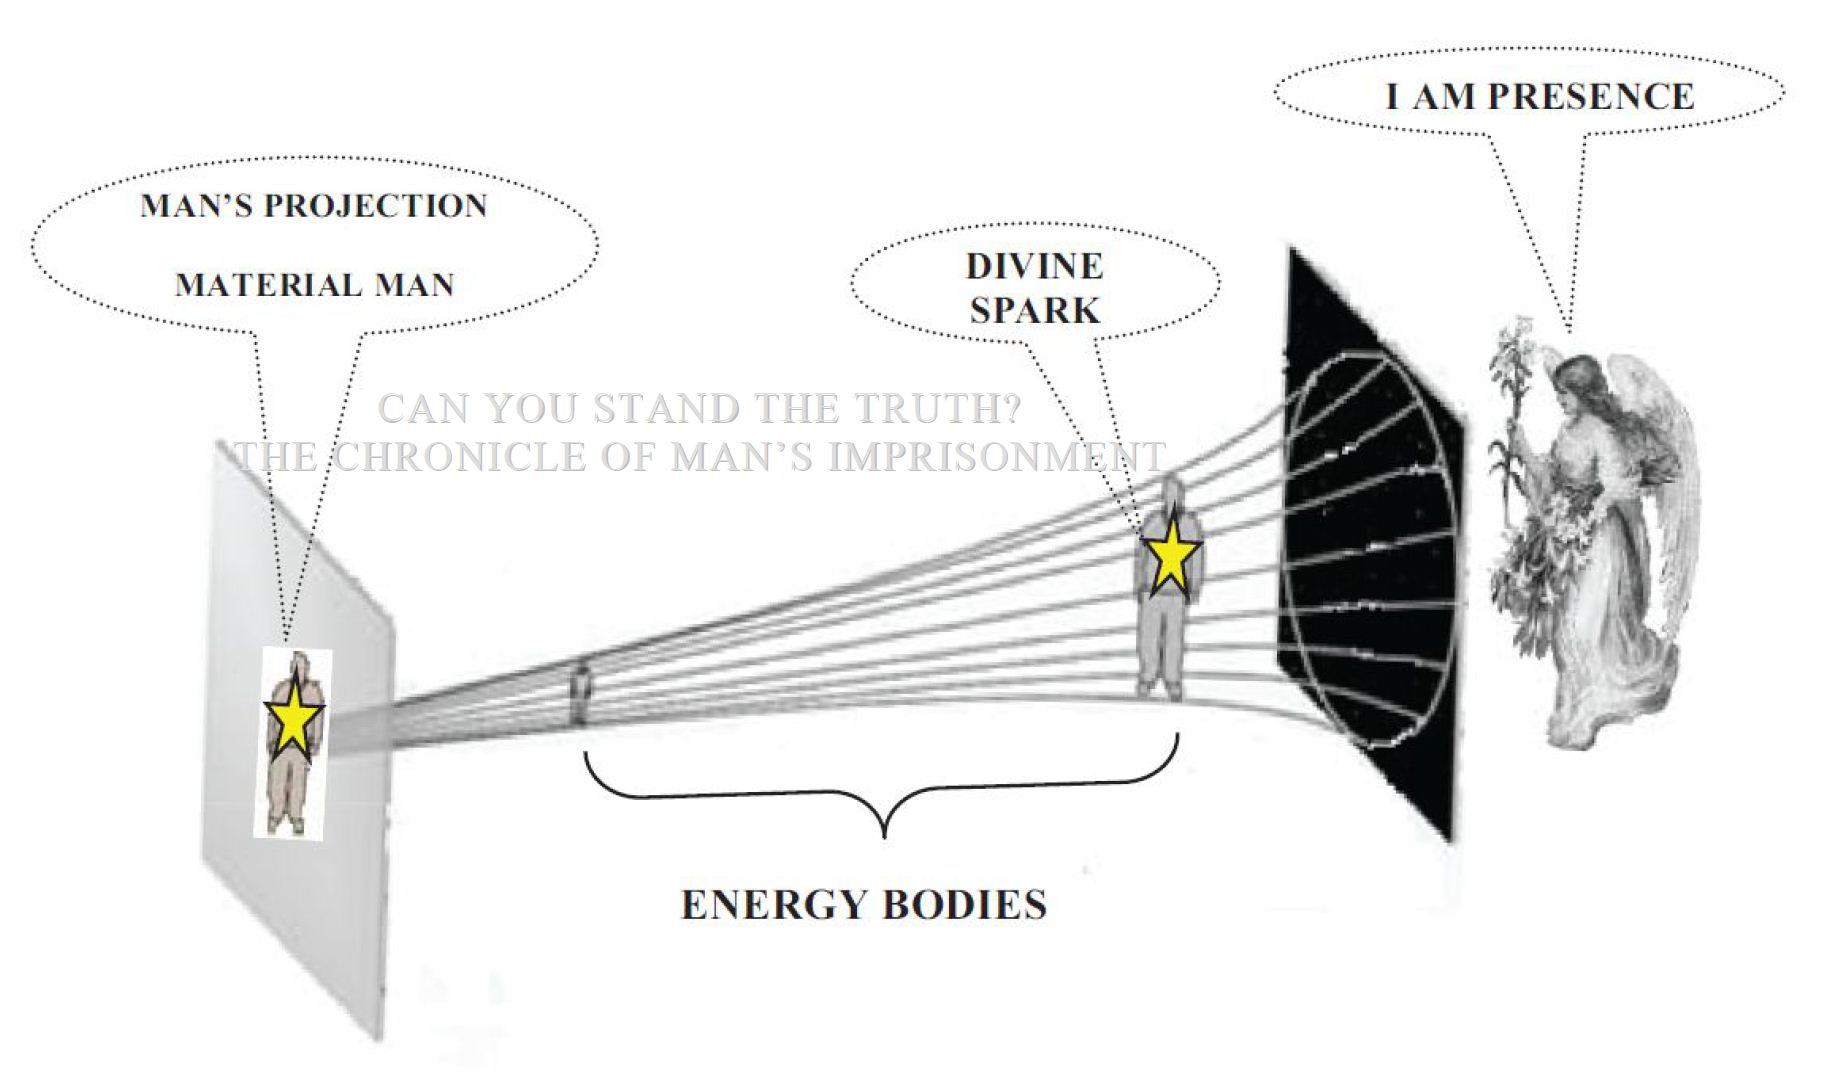 projectionenergy bodies, The energy bodies of man